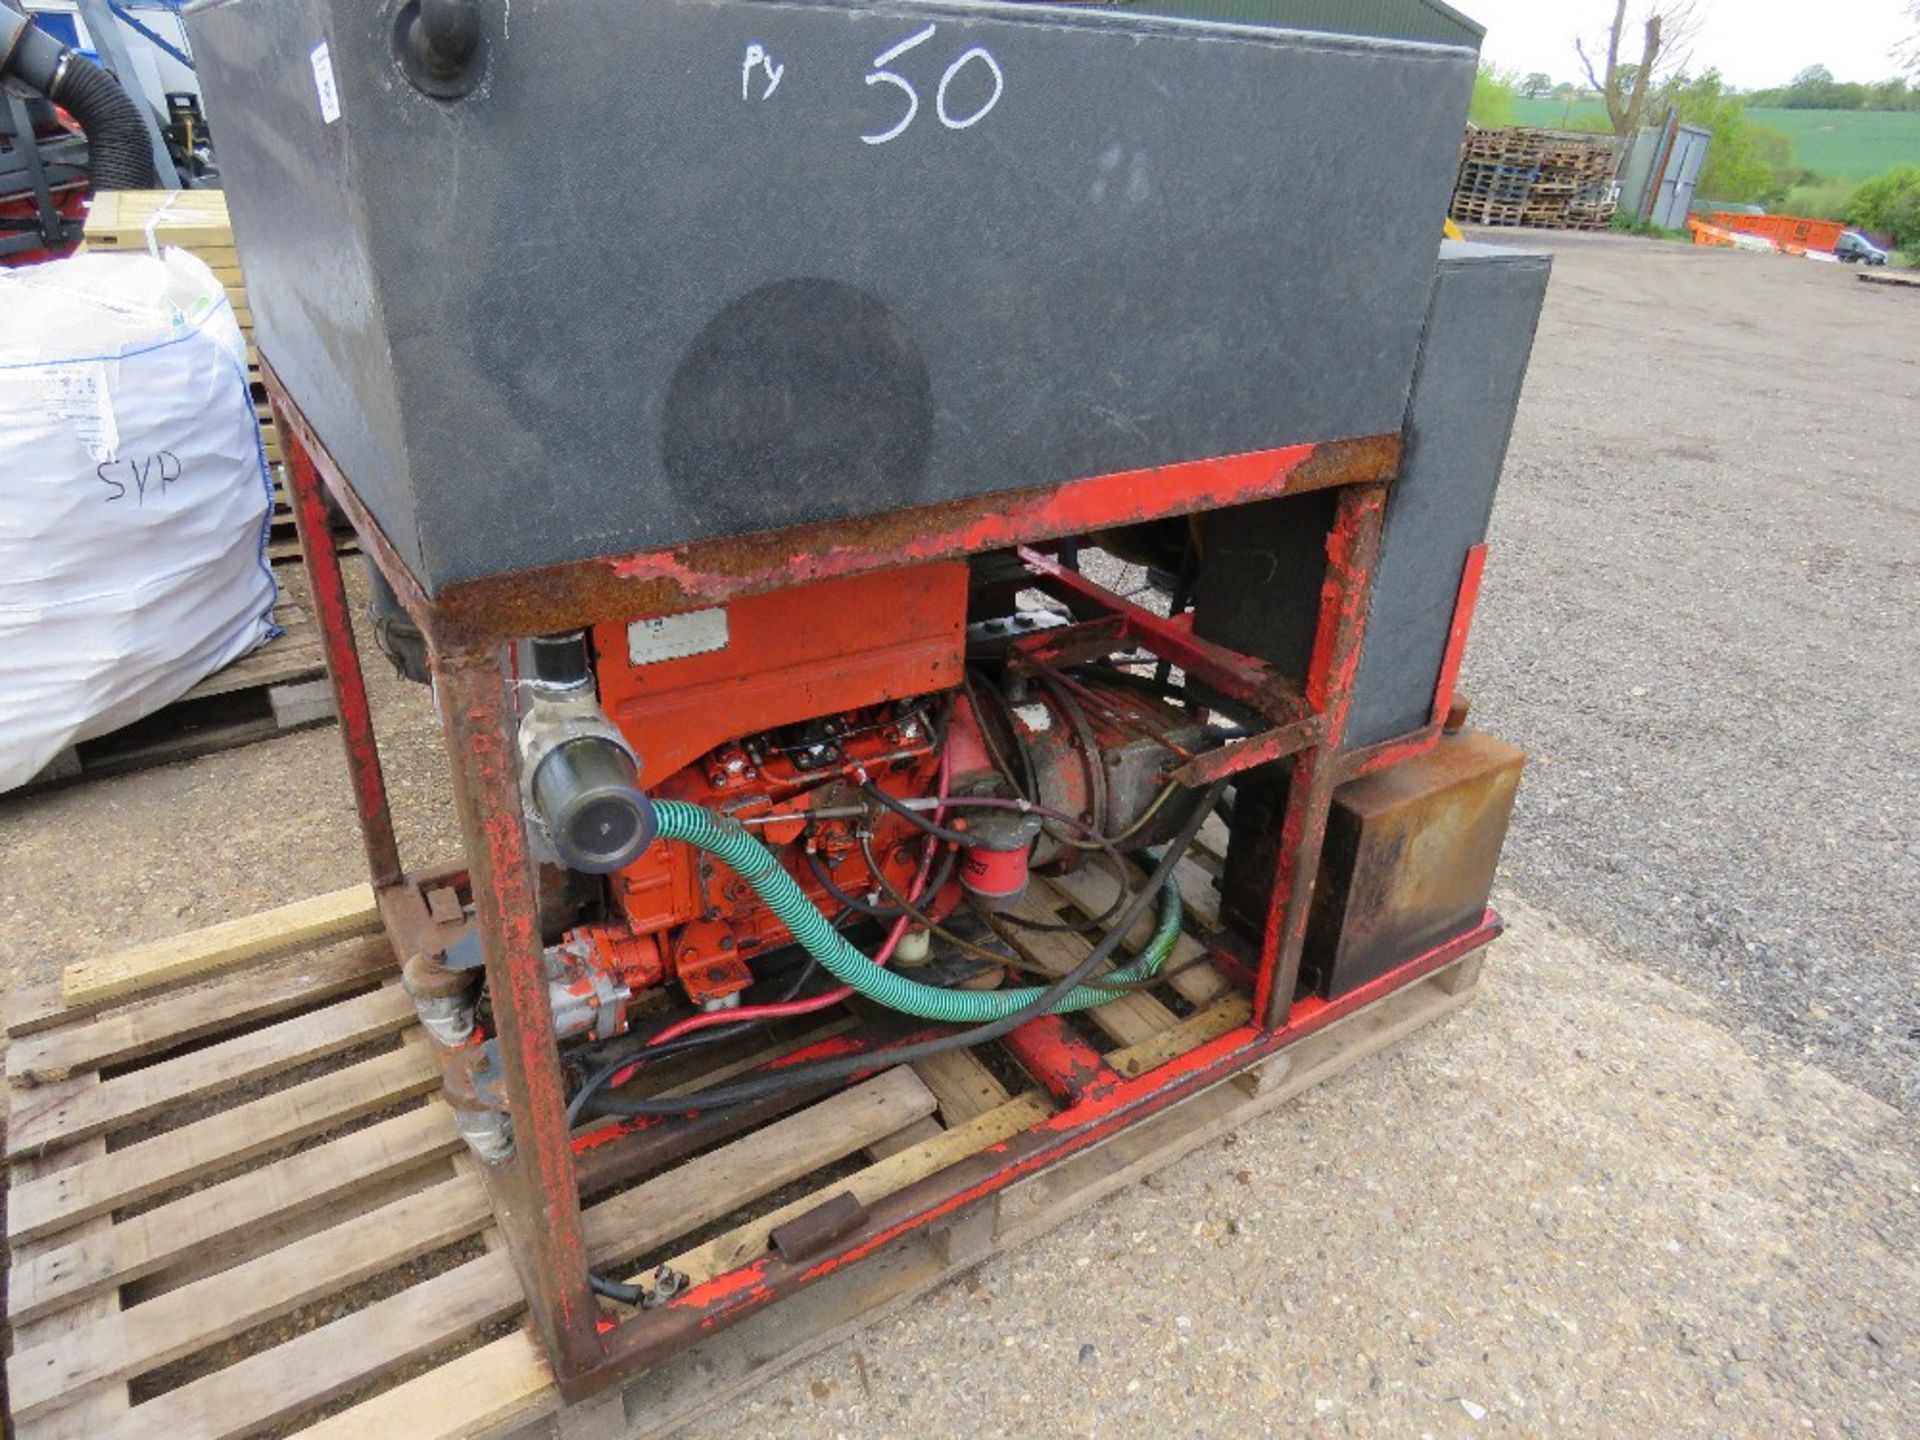 DIESEL ENGINED 3 CYLINDER HIGH PRESSURE JETTING/WASHER UNIT. UNTESTED, CONDITION UNKNOWN.